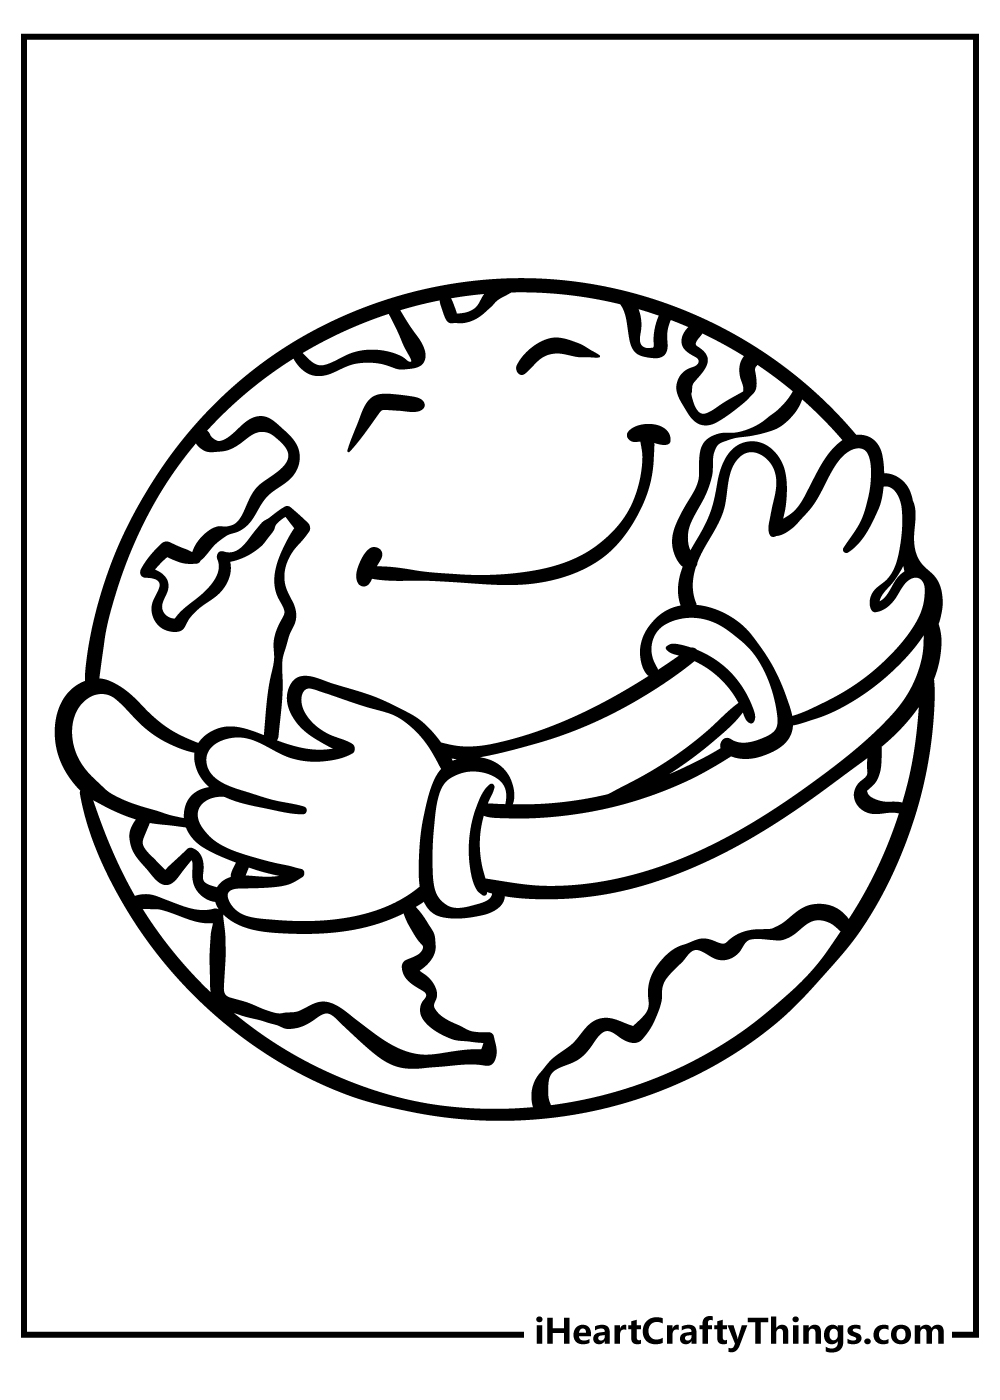 Earth Coloring Book for kids free printable